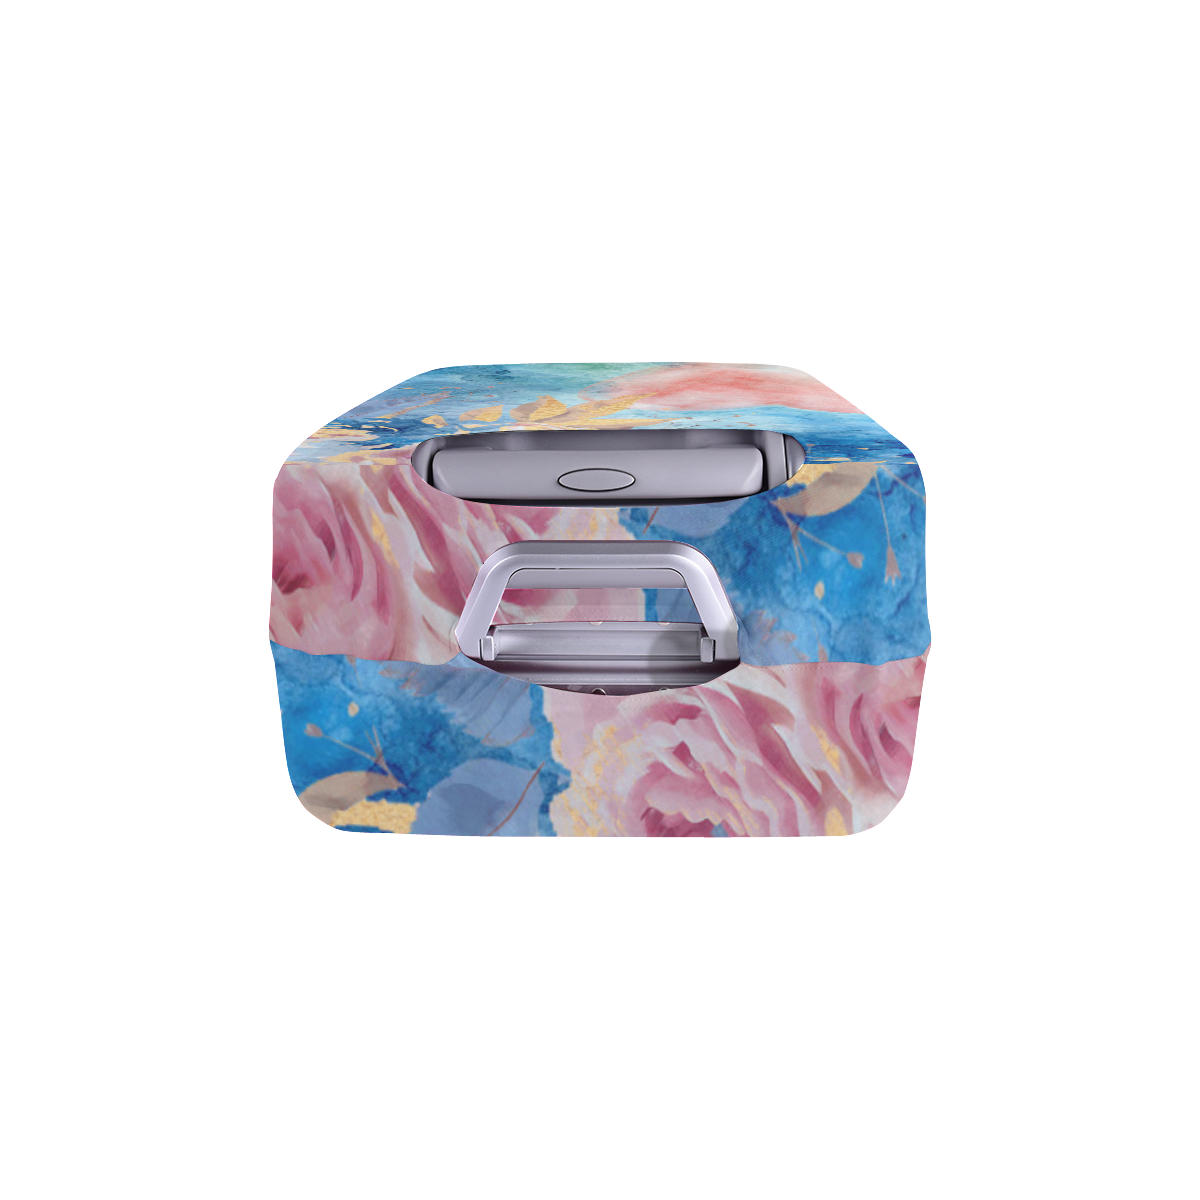 Heart and Flowers - Pink and Blue Luggage Cover/Large 26"-28"